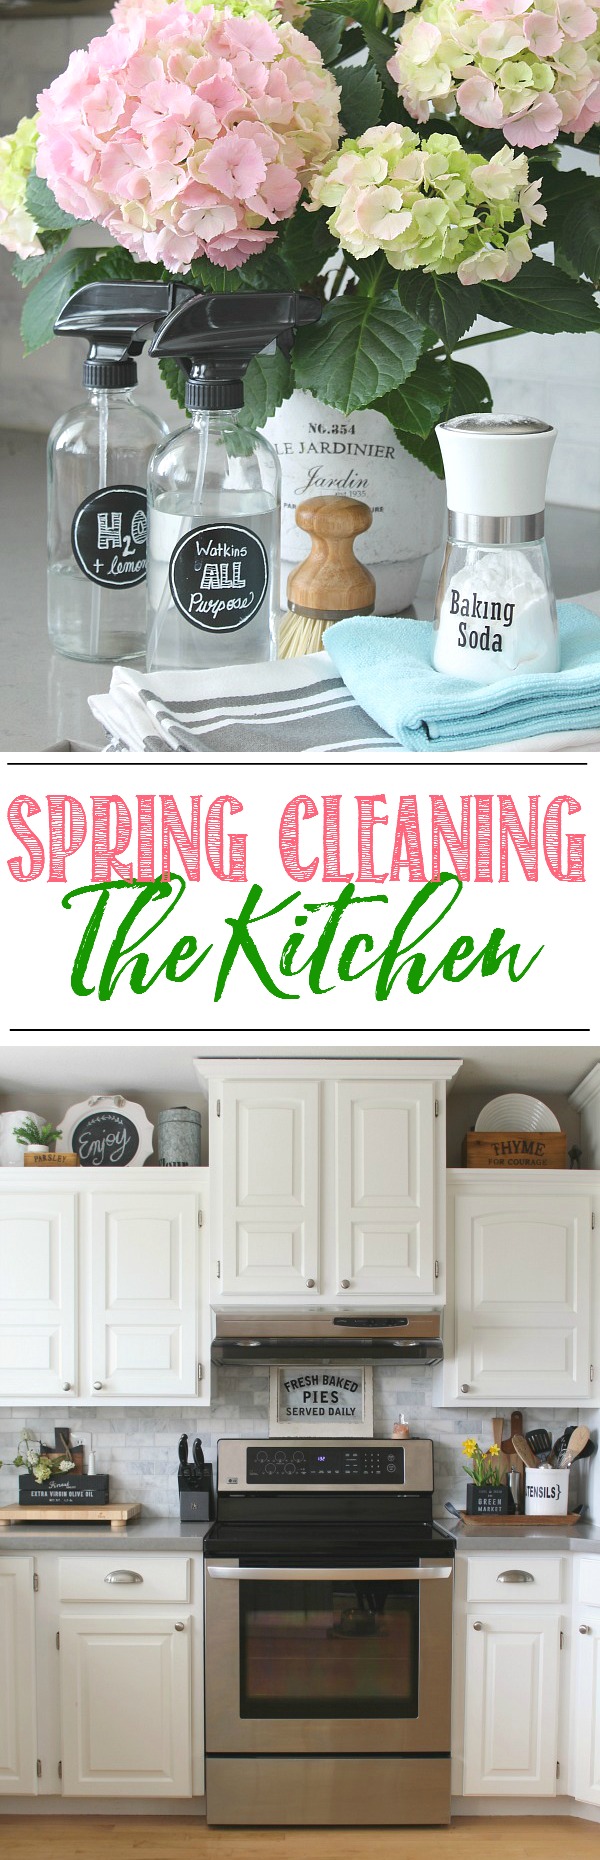 Kitchen Spring Cleaning Guide - Everything you need to get your kitchen cleaned from top to bottom!